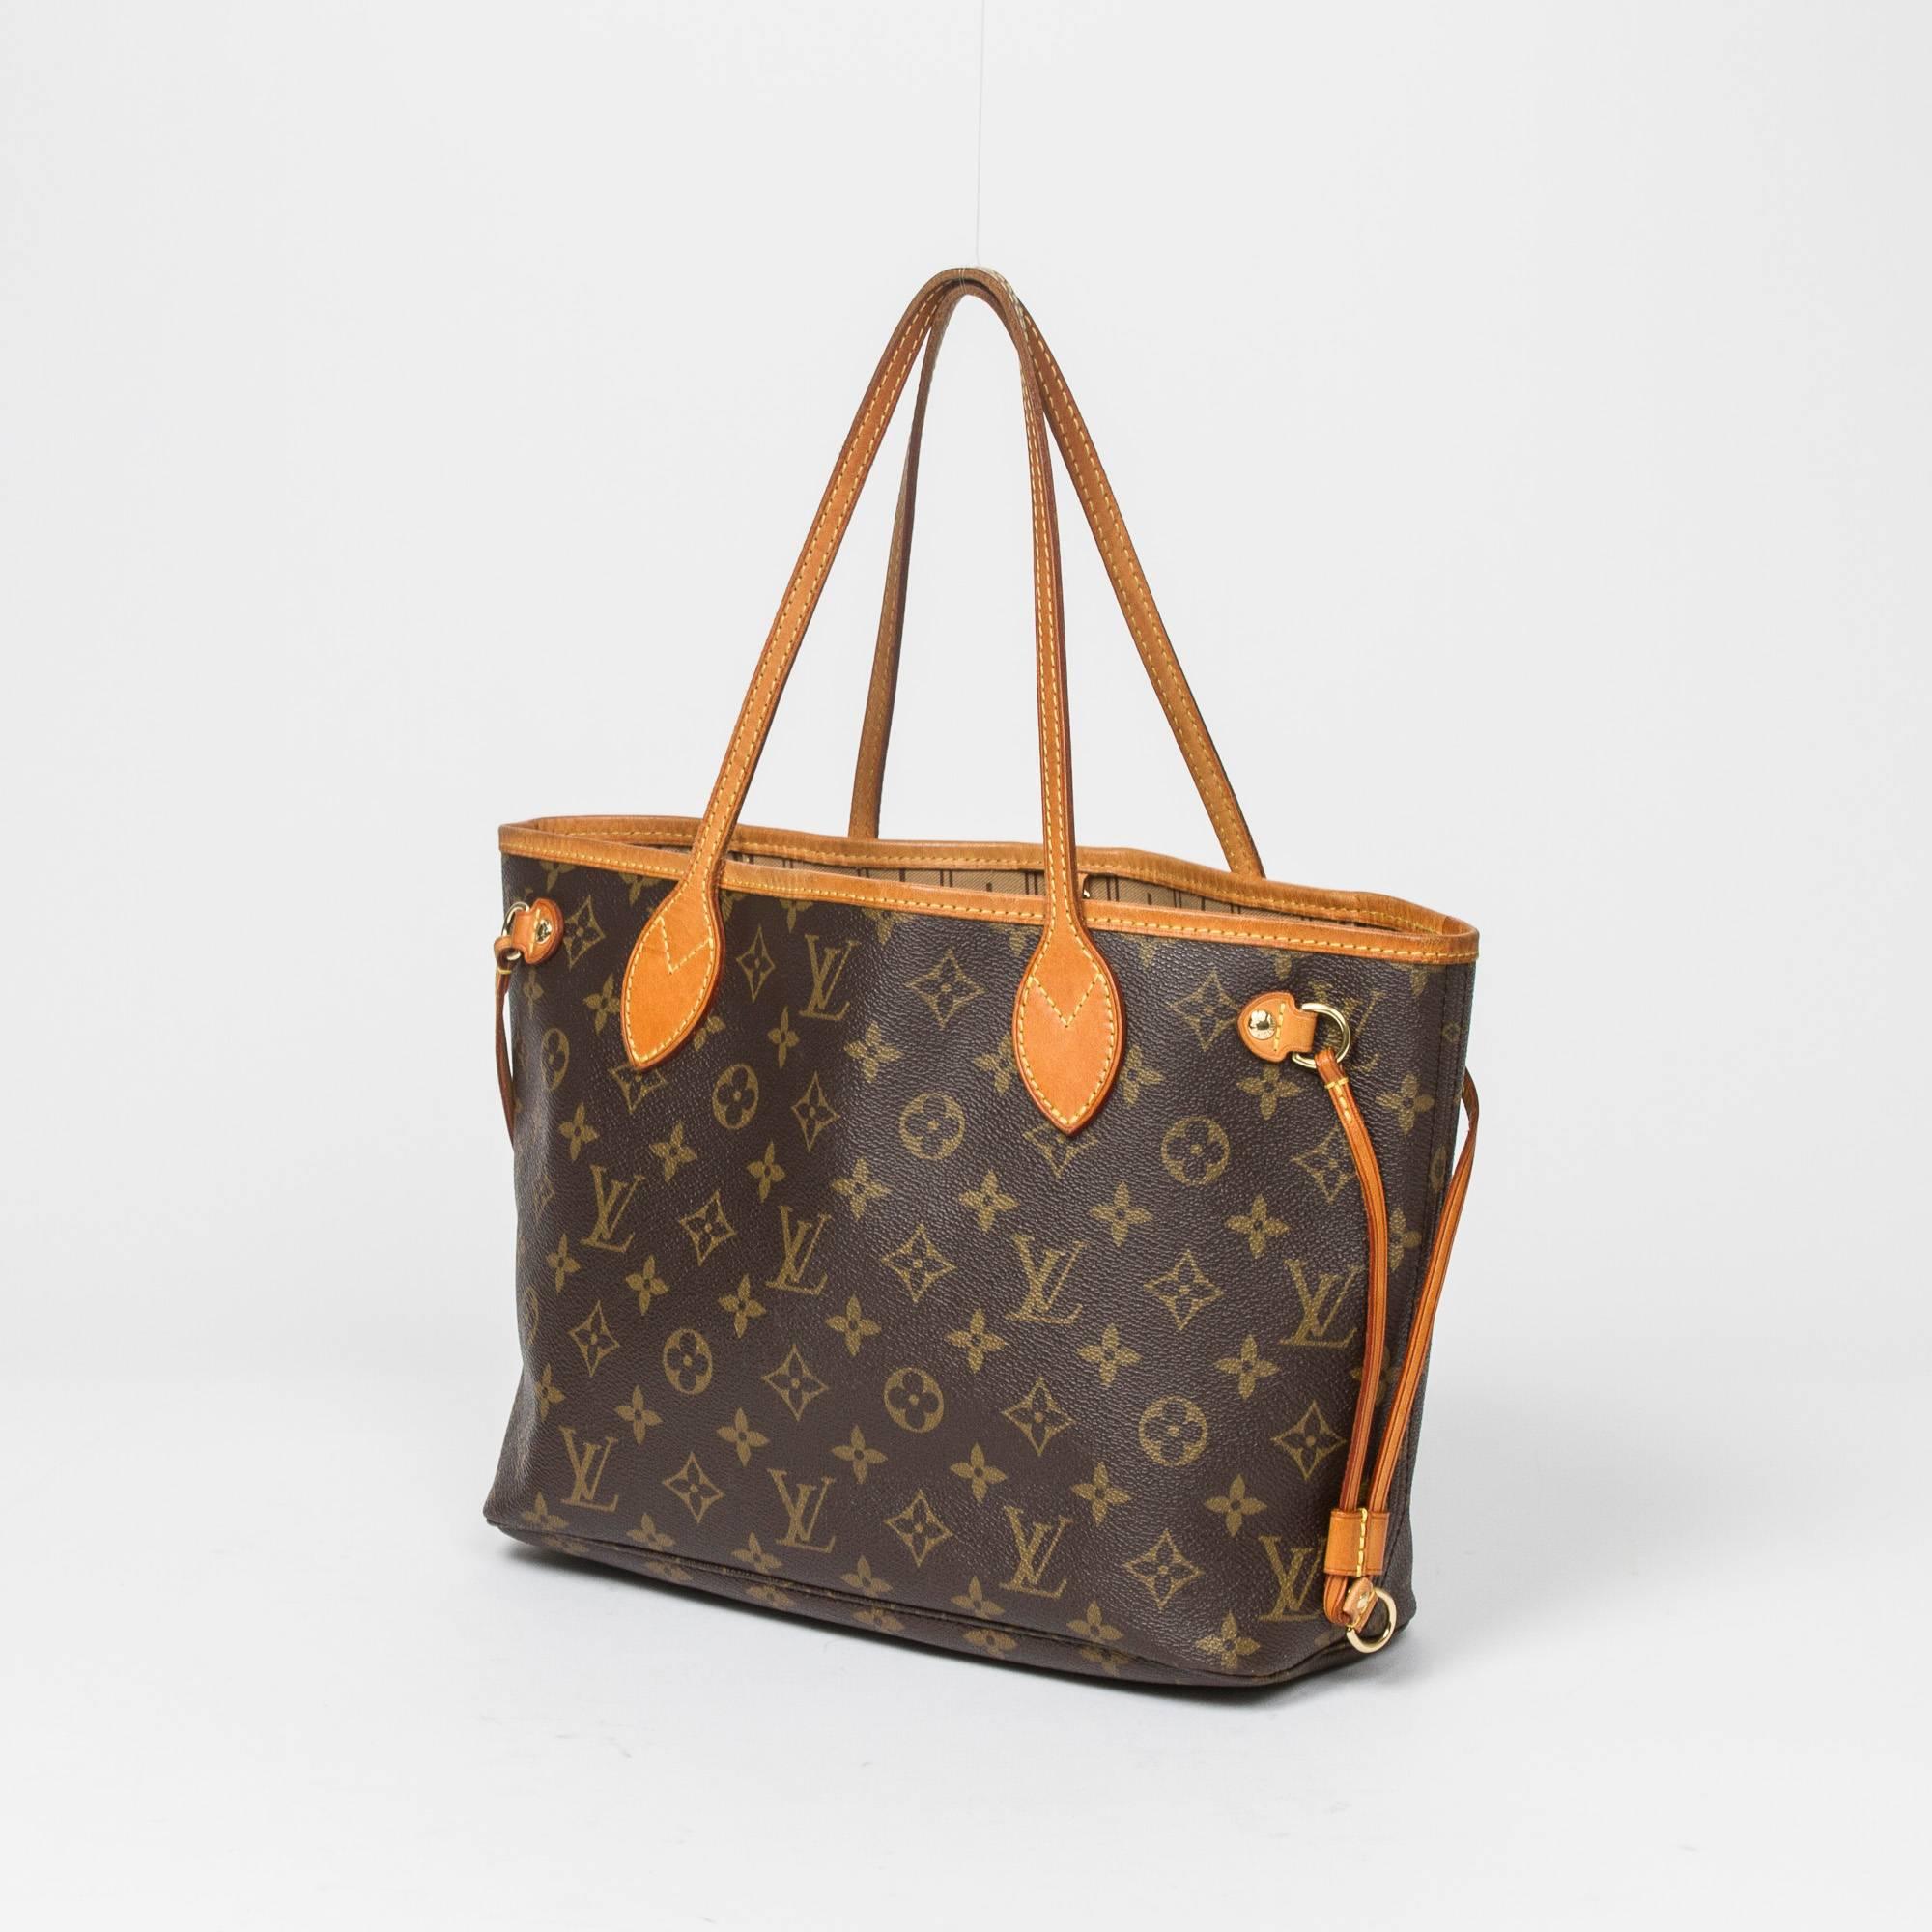 Neverfull PM in brown monogram canvas with vachetta leather straps and golden brass hardware. Hook clasp closure. Light brown striped canvas lined interior with one zip pocket and 